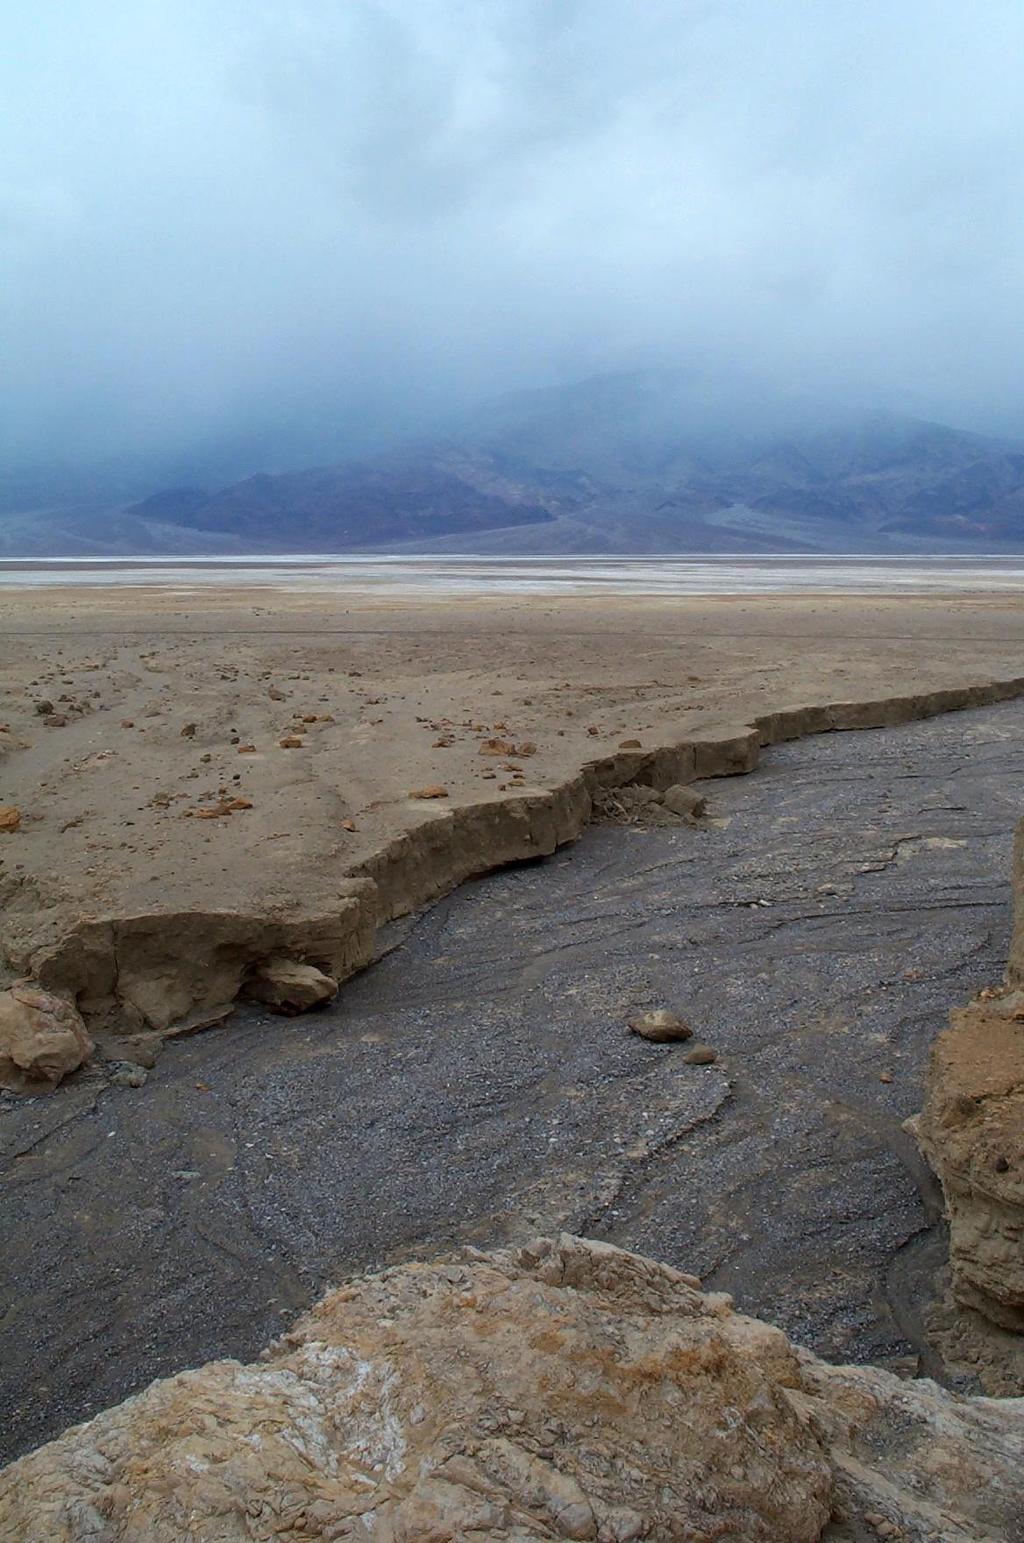 Another Example Death Valley is the hottest and driest location on the continent.